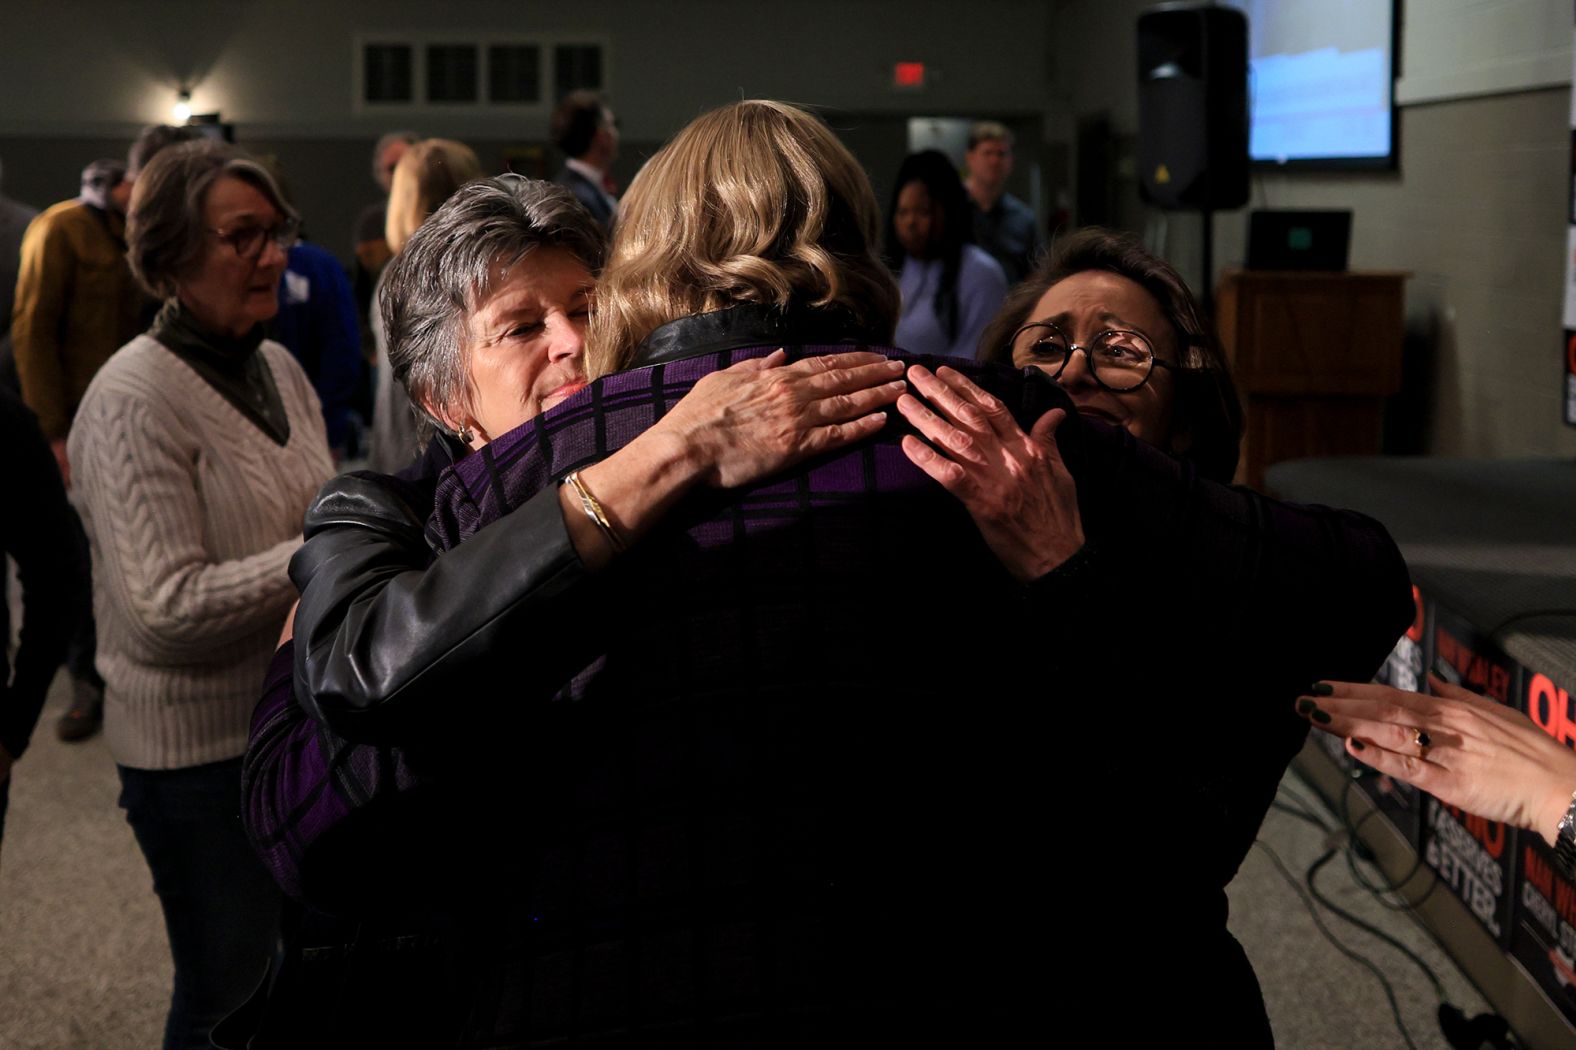 Ohio gubernatorial candidate Nan Whaley hugs supporters during an election night watch party in Dayton. <a href="index.php?page=&url=https%3A%2F%2Fwww.cnn.com%2Fpolitics%2Flive-news%2Fmidterm-election-results-livestream-voting-11-08-2022%2Fh_6dab3e1f3532b3062bc489d6ab42108d" target="_blank">Whaley, a Democrat, lost to Gov. Mike DeWine, CNN projected.</a>